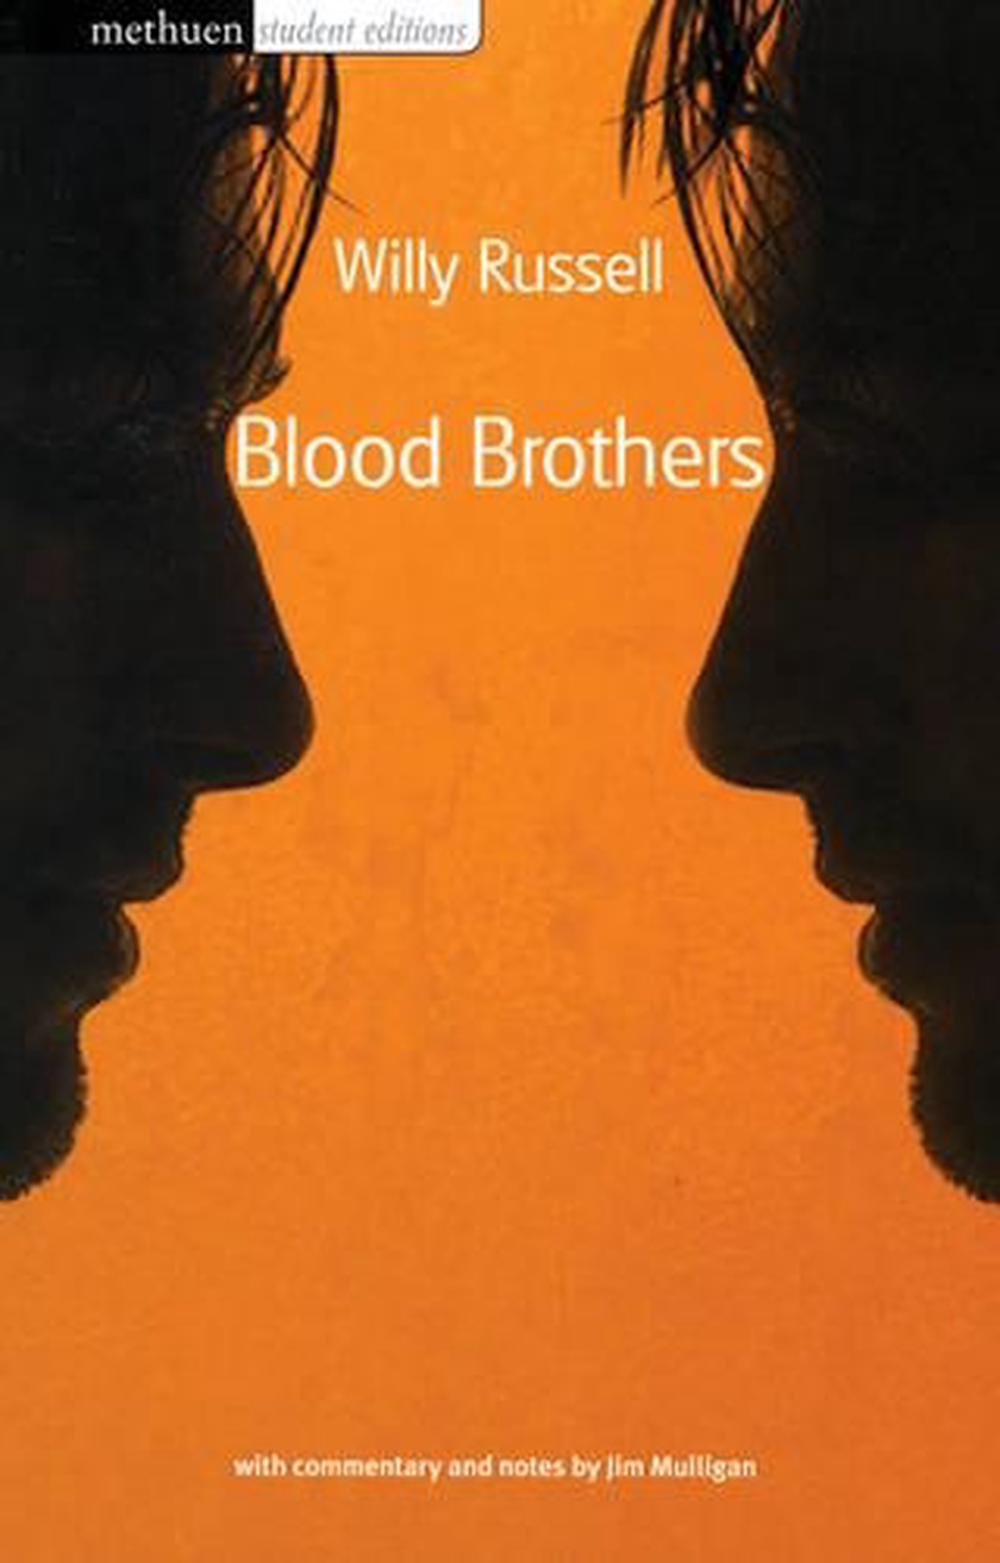 blood brothers book on brothers with leukemia